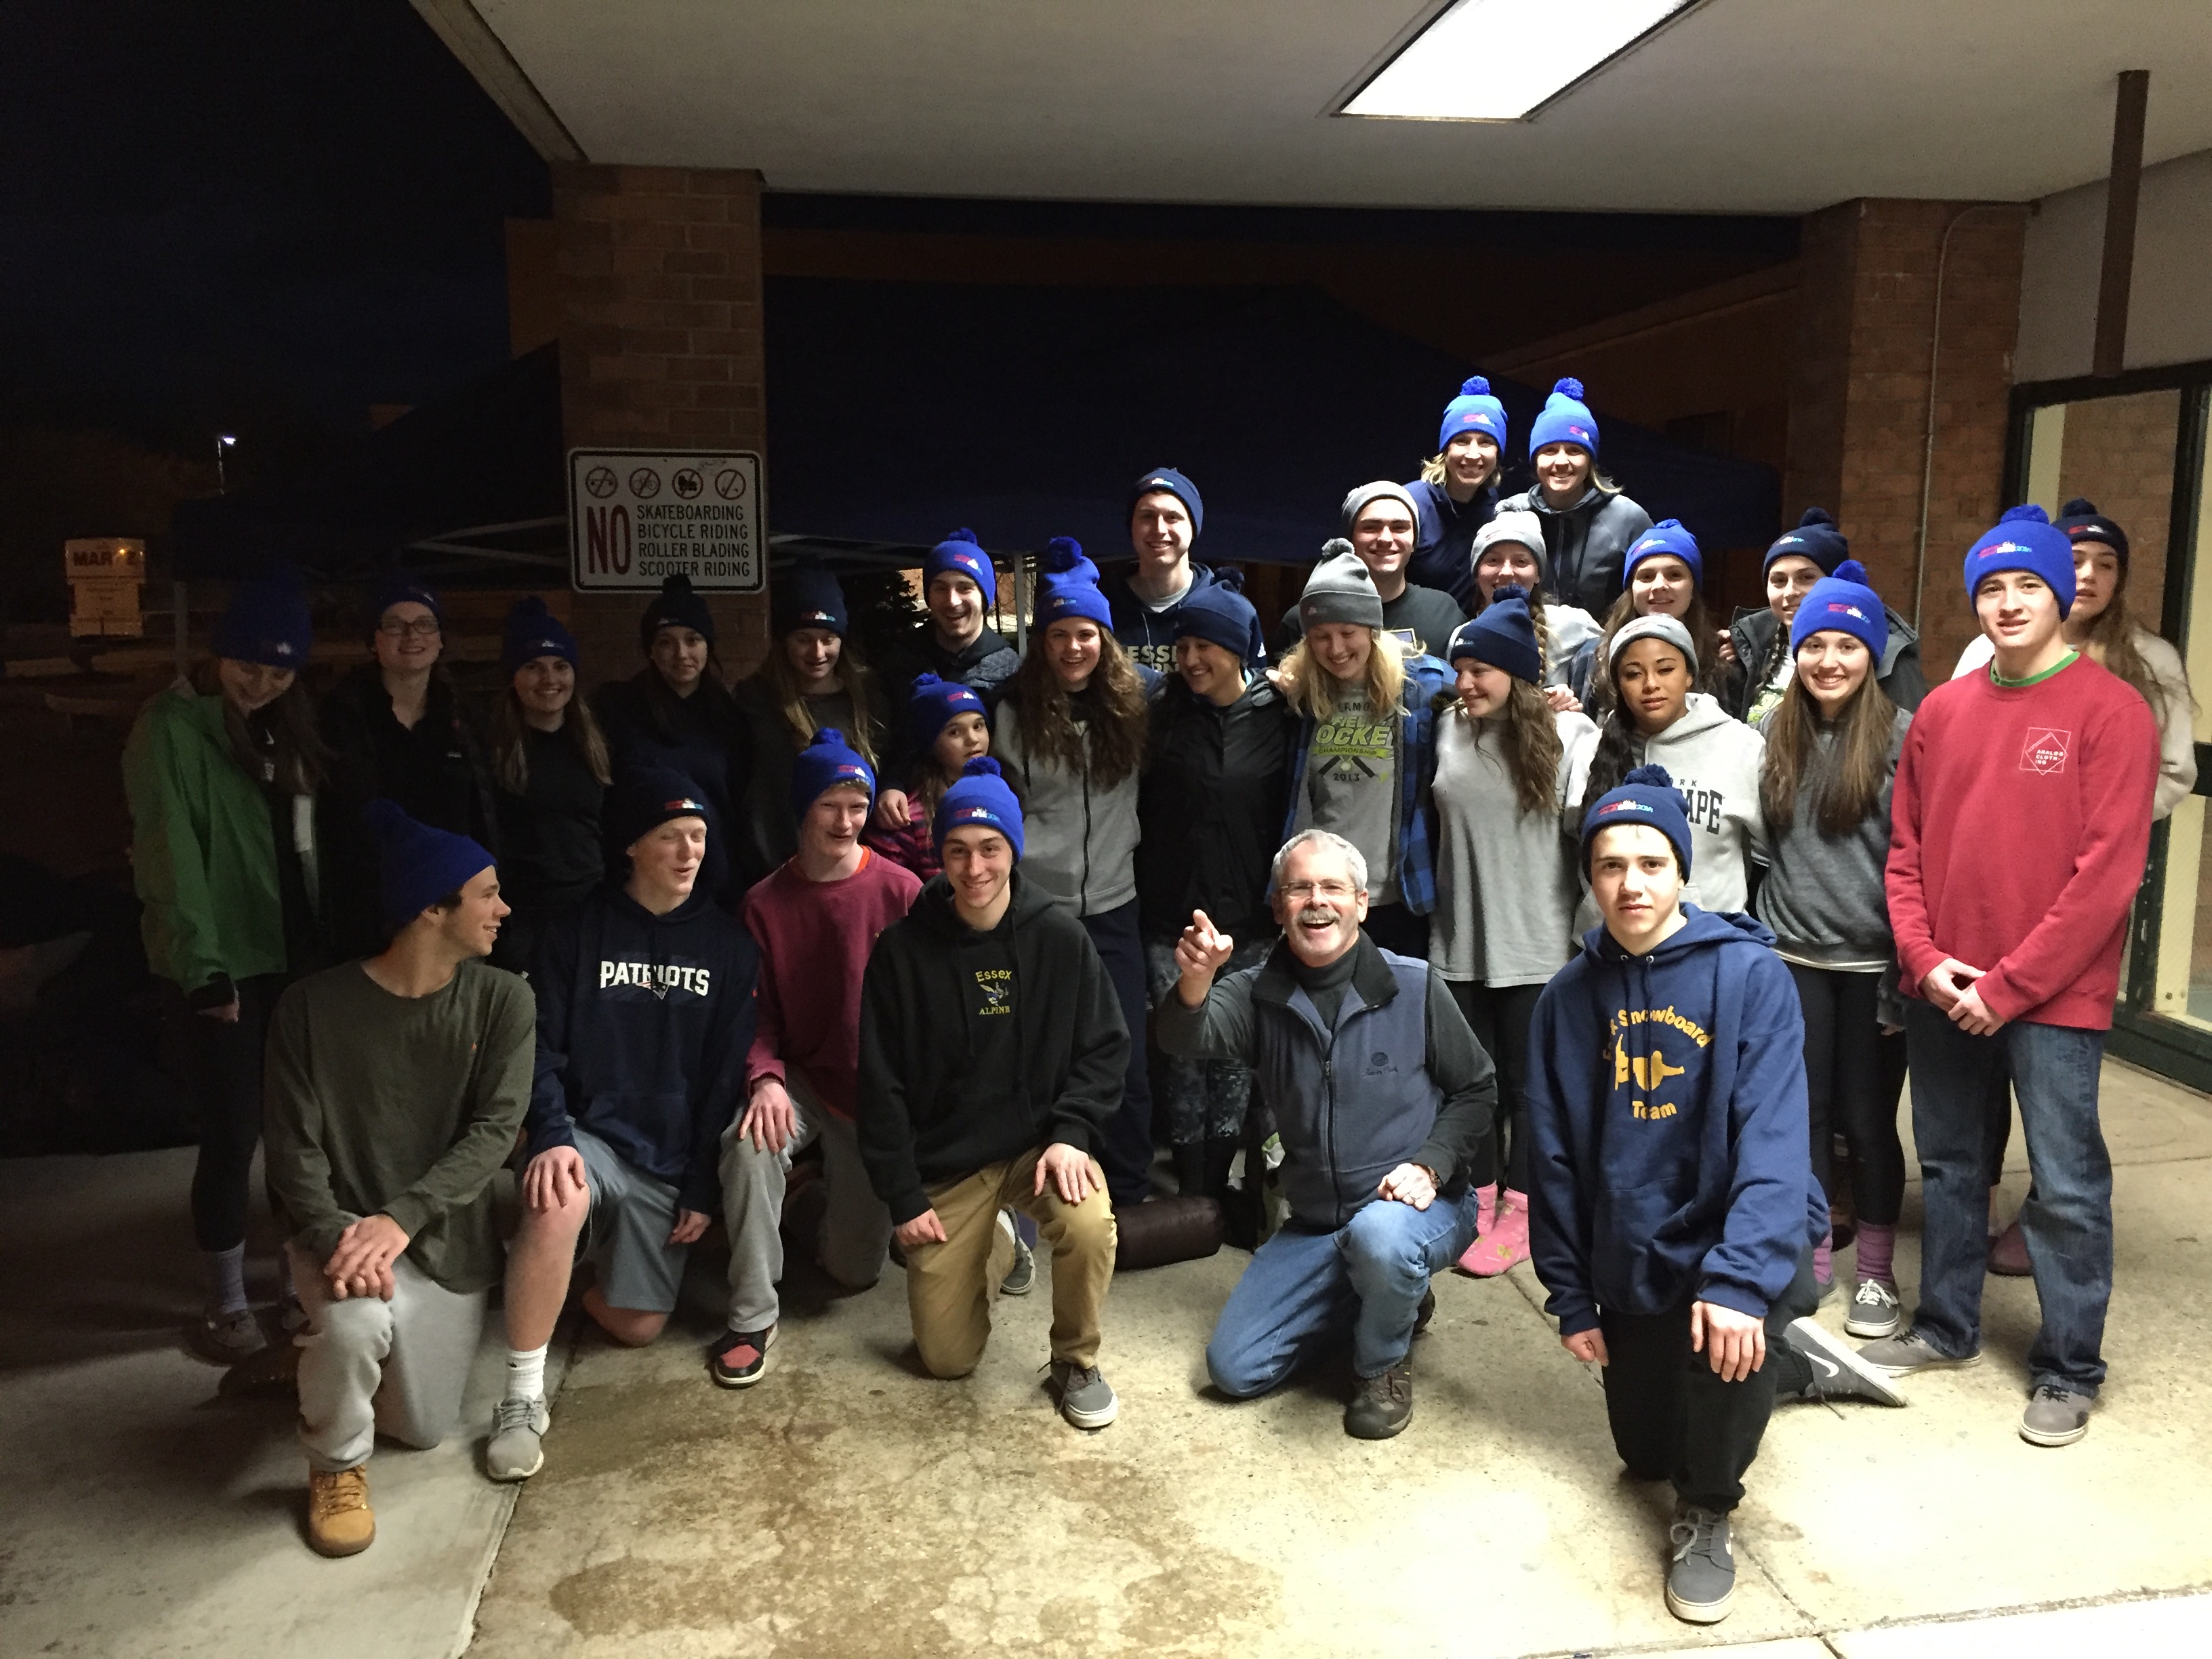 Essex Students at the Sleep Out